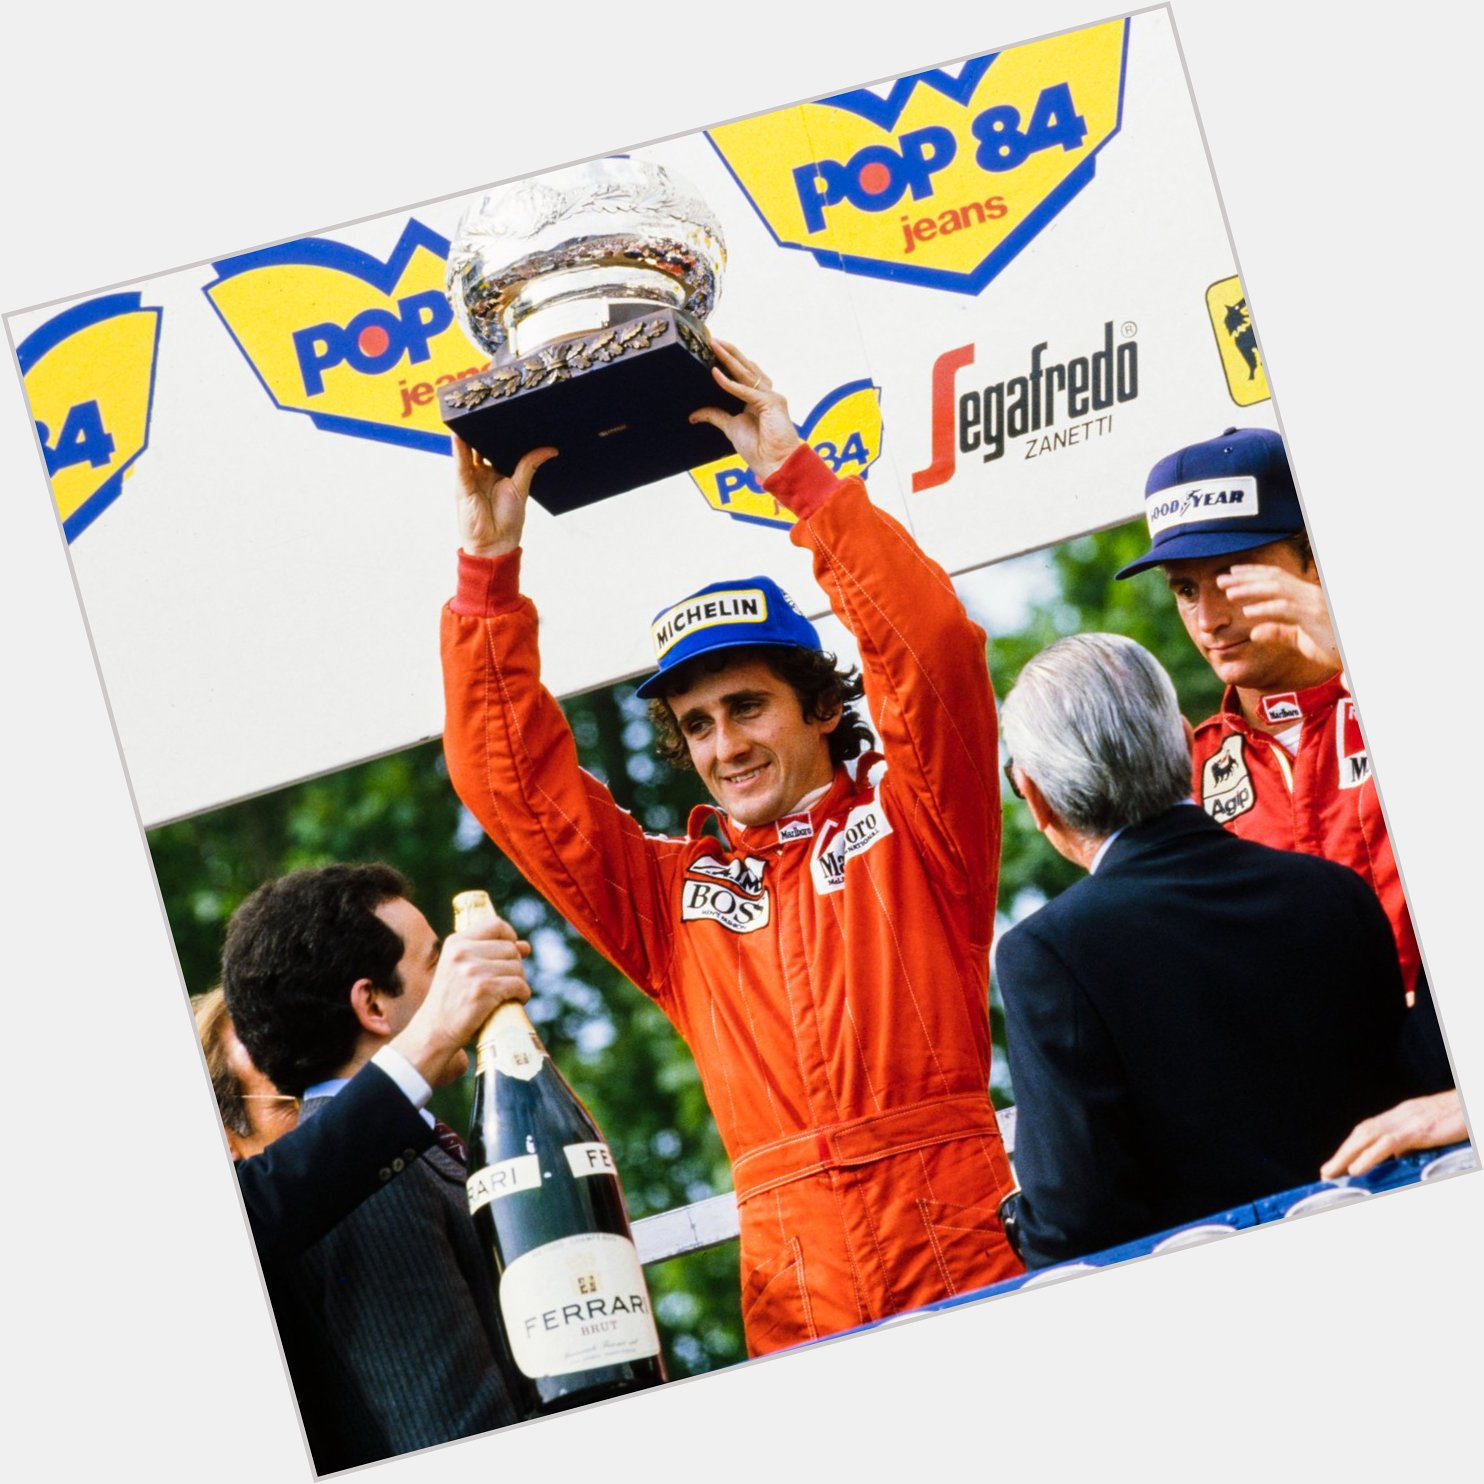 Wishing four-time World Champion and former McLaren driver, Alain Prost a happy 67th birthday! 